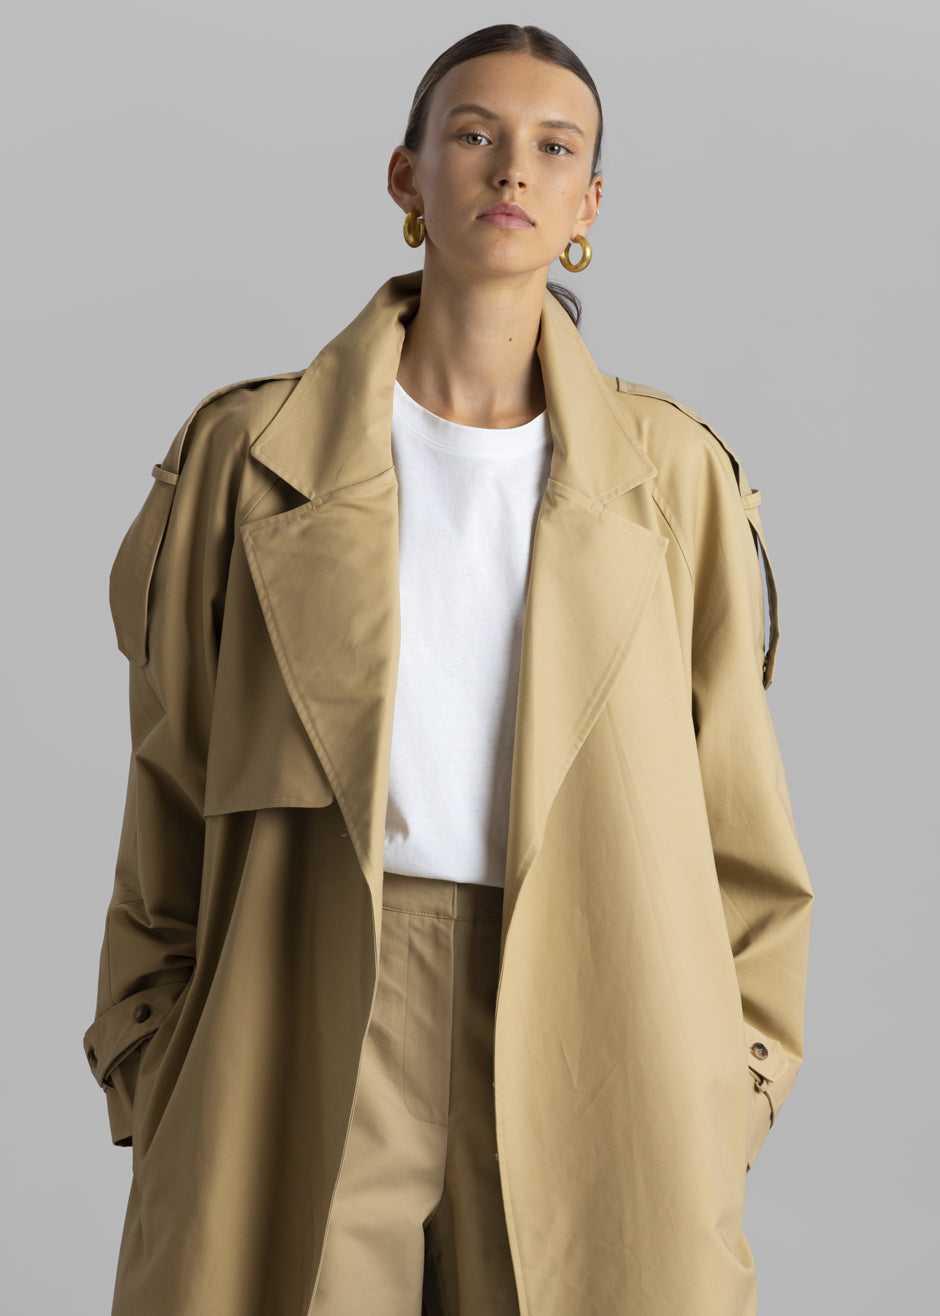 Suzanne Trench Coat - Beige - 8